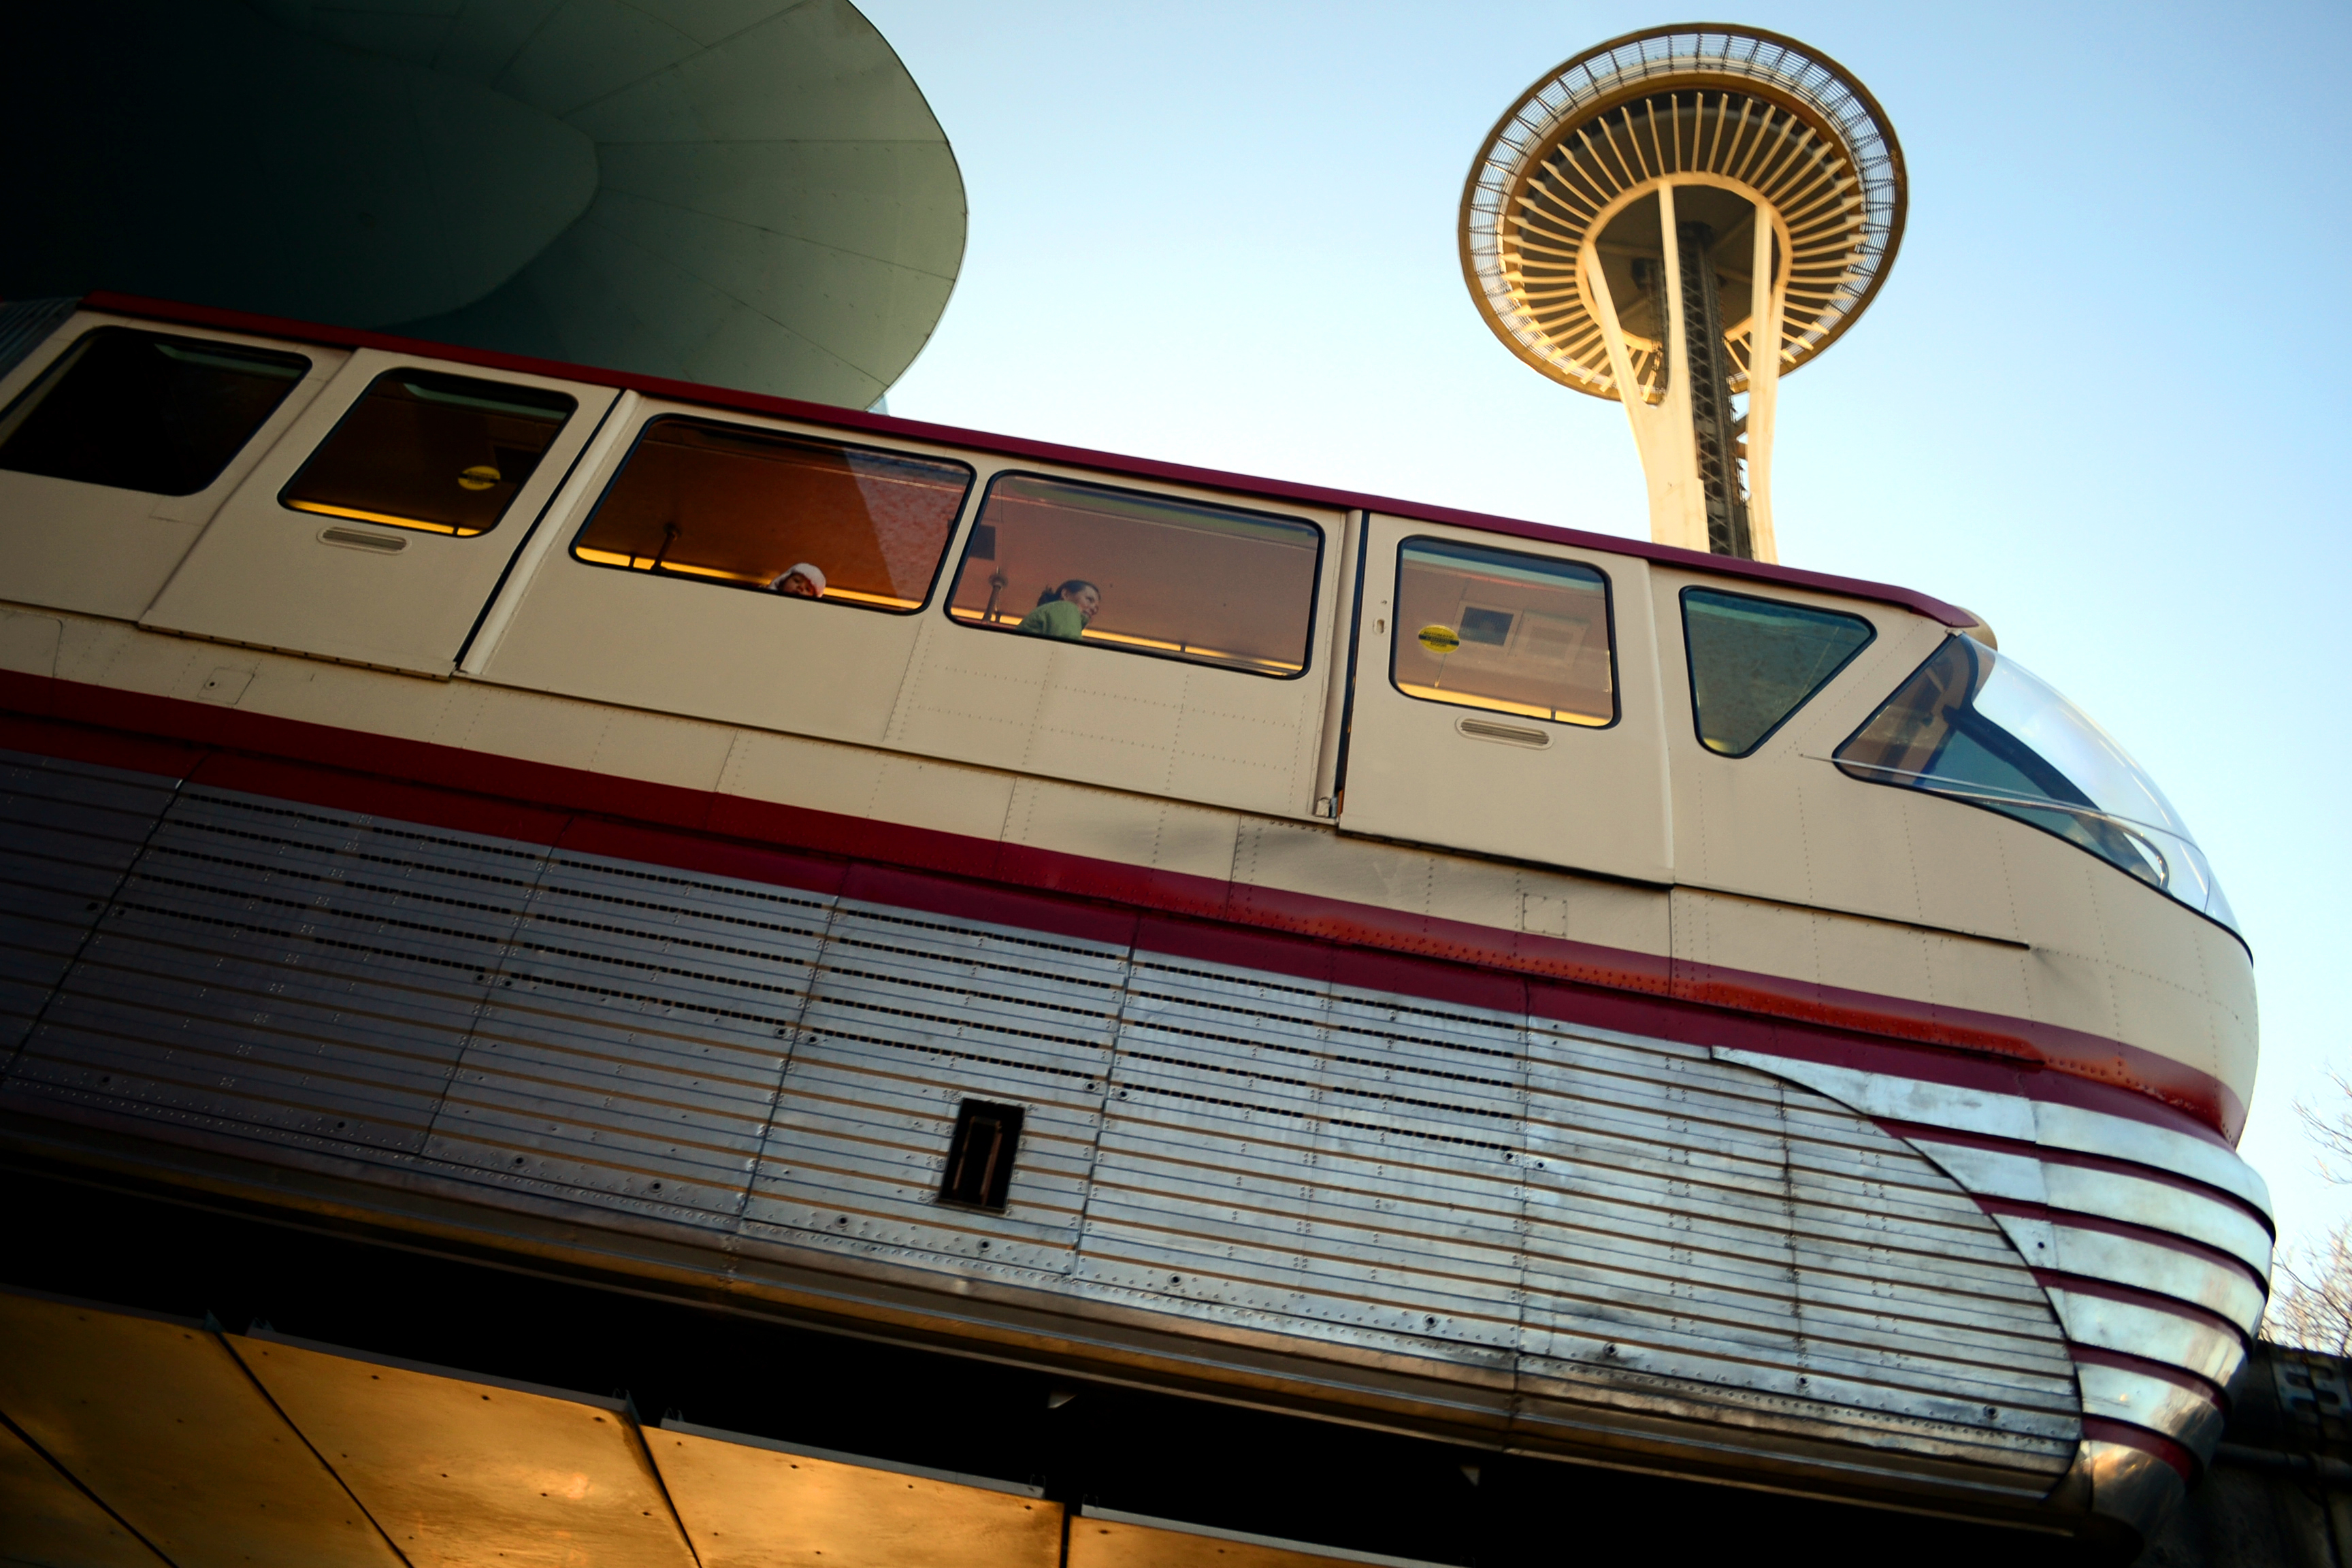 A monorail train exits a tunnel under a blue sky and a tall building with a saucer on top (the Space Needle).